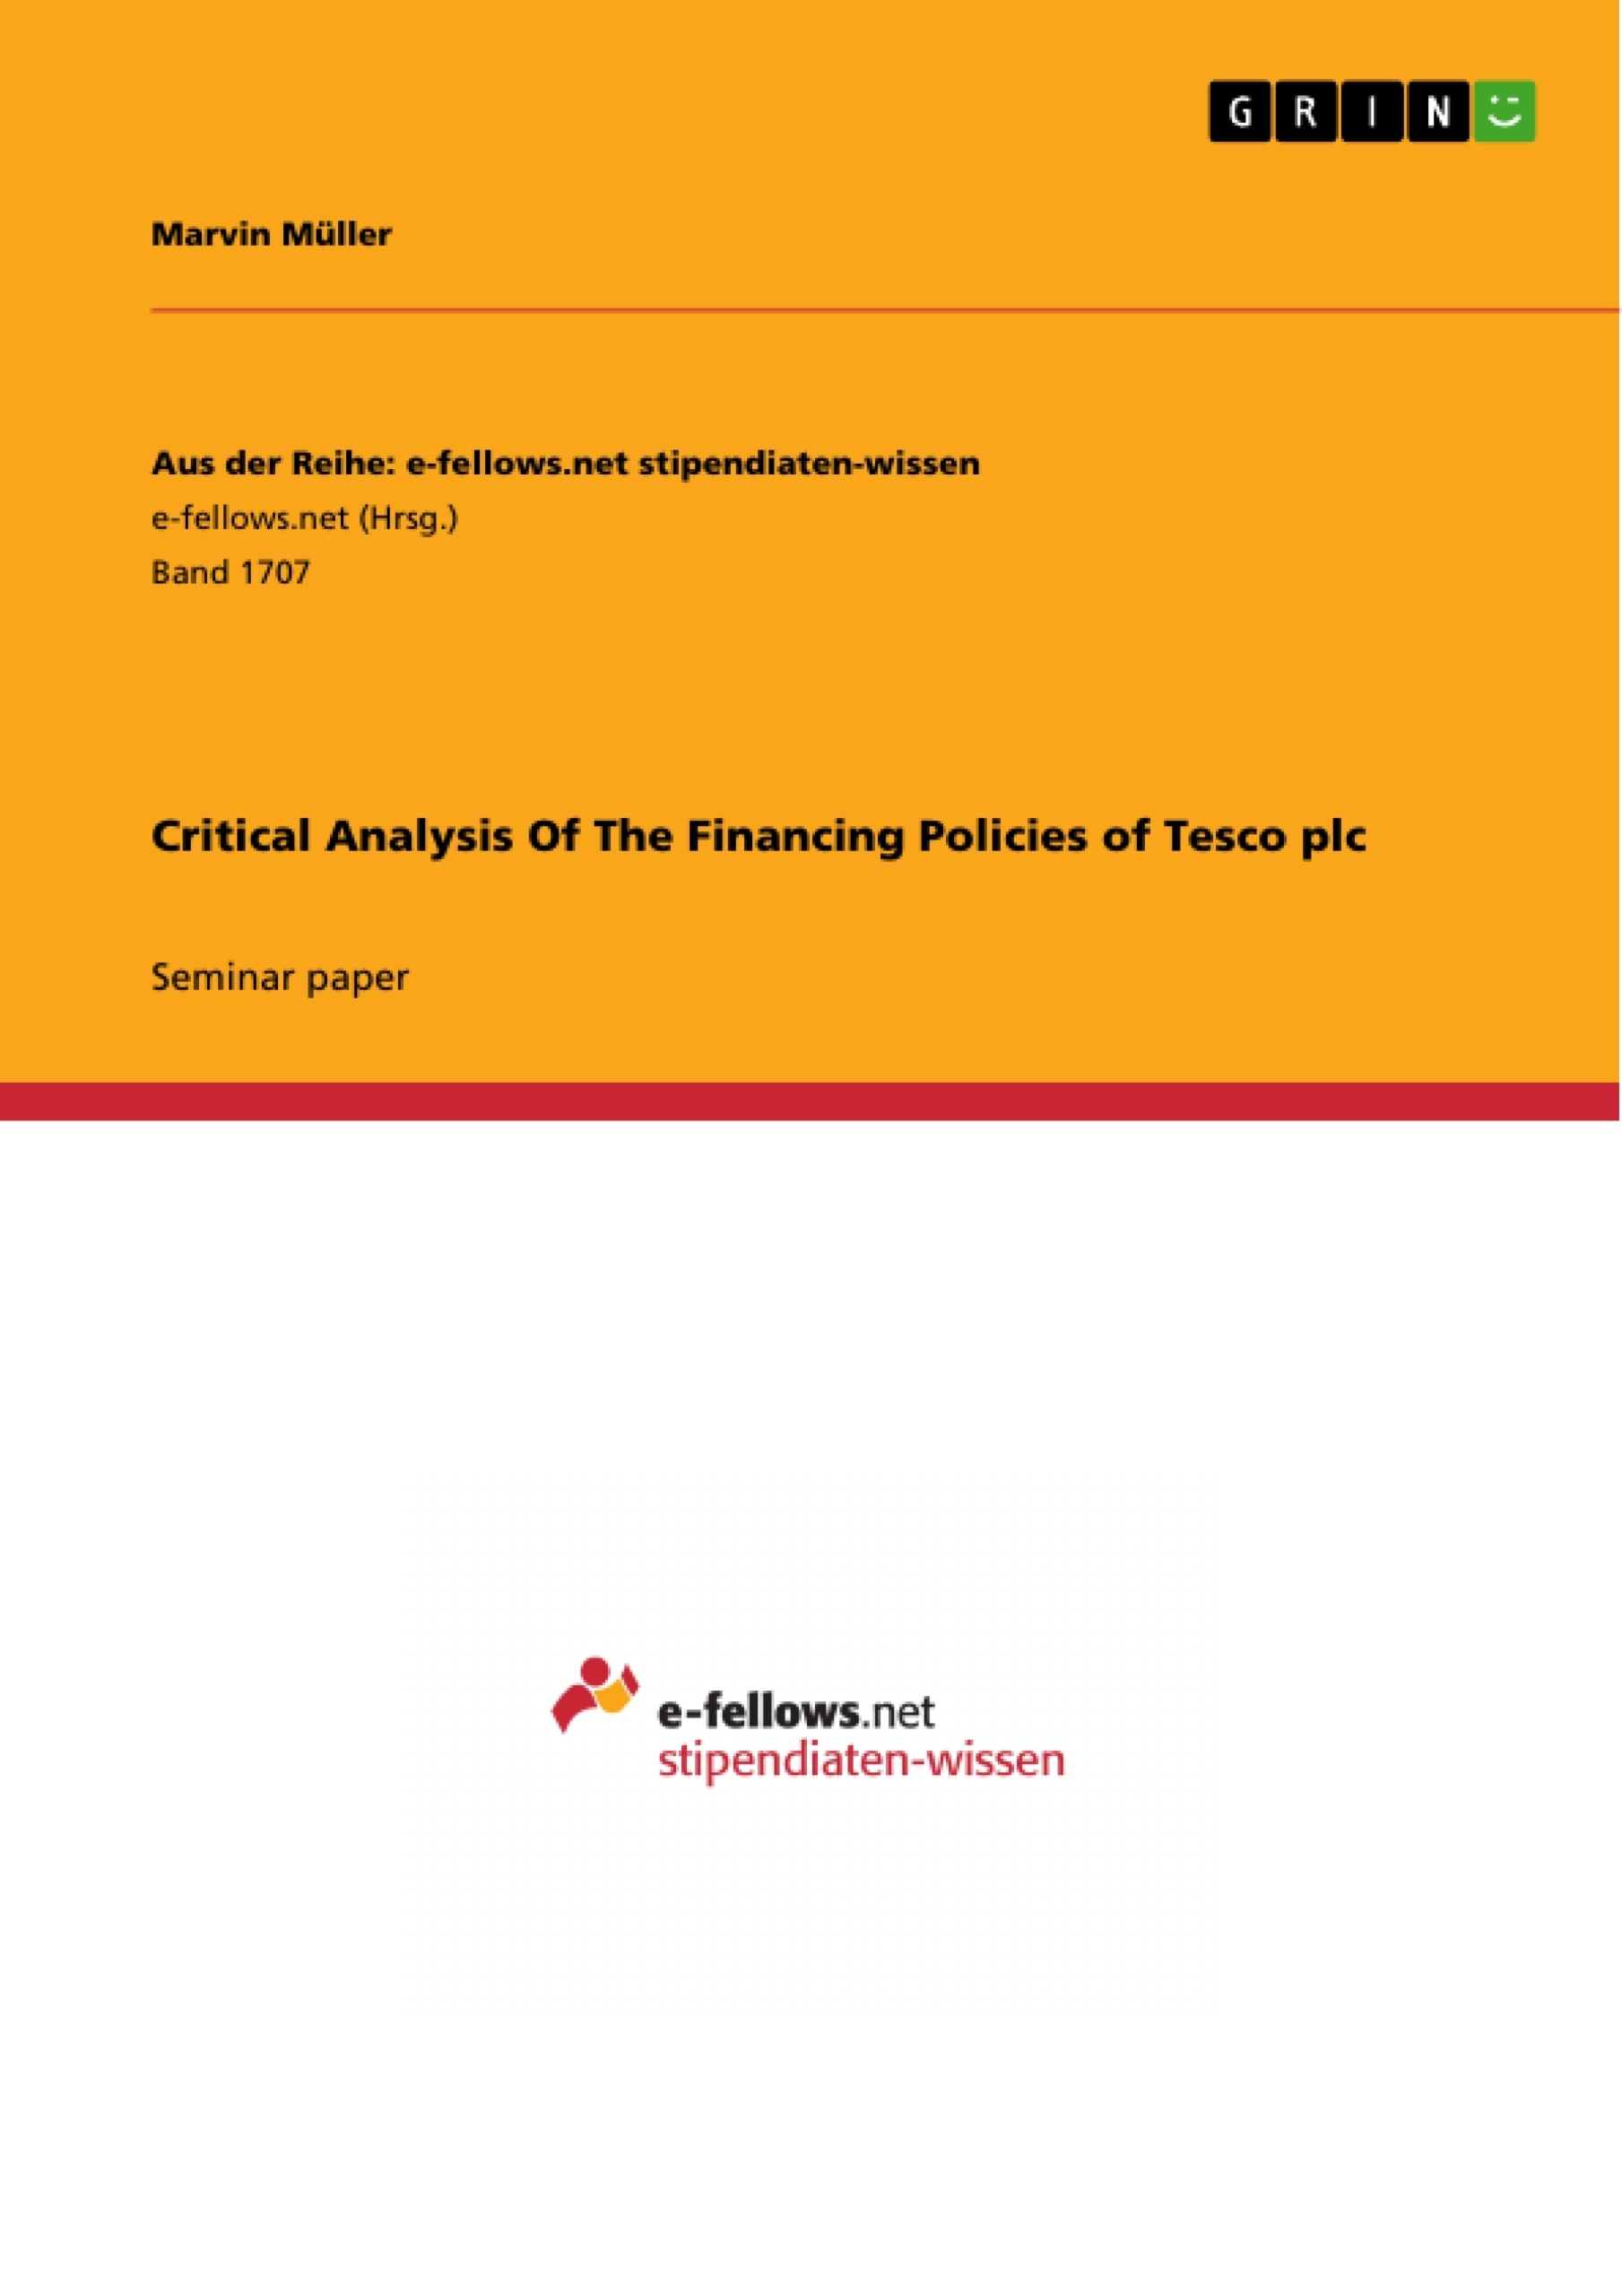 Title: Critical Analysis Of The Financing Policies of Tesco plc